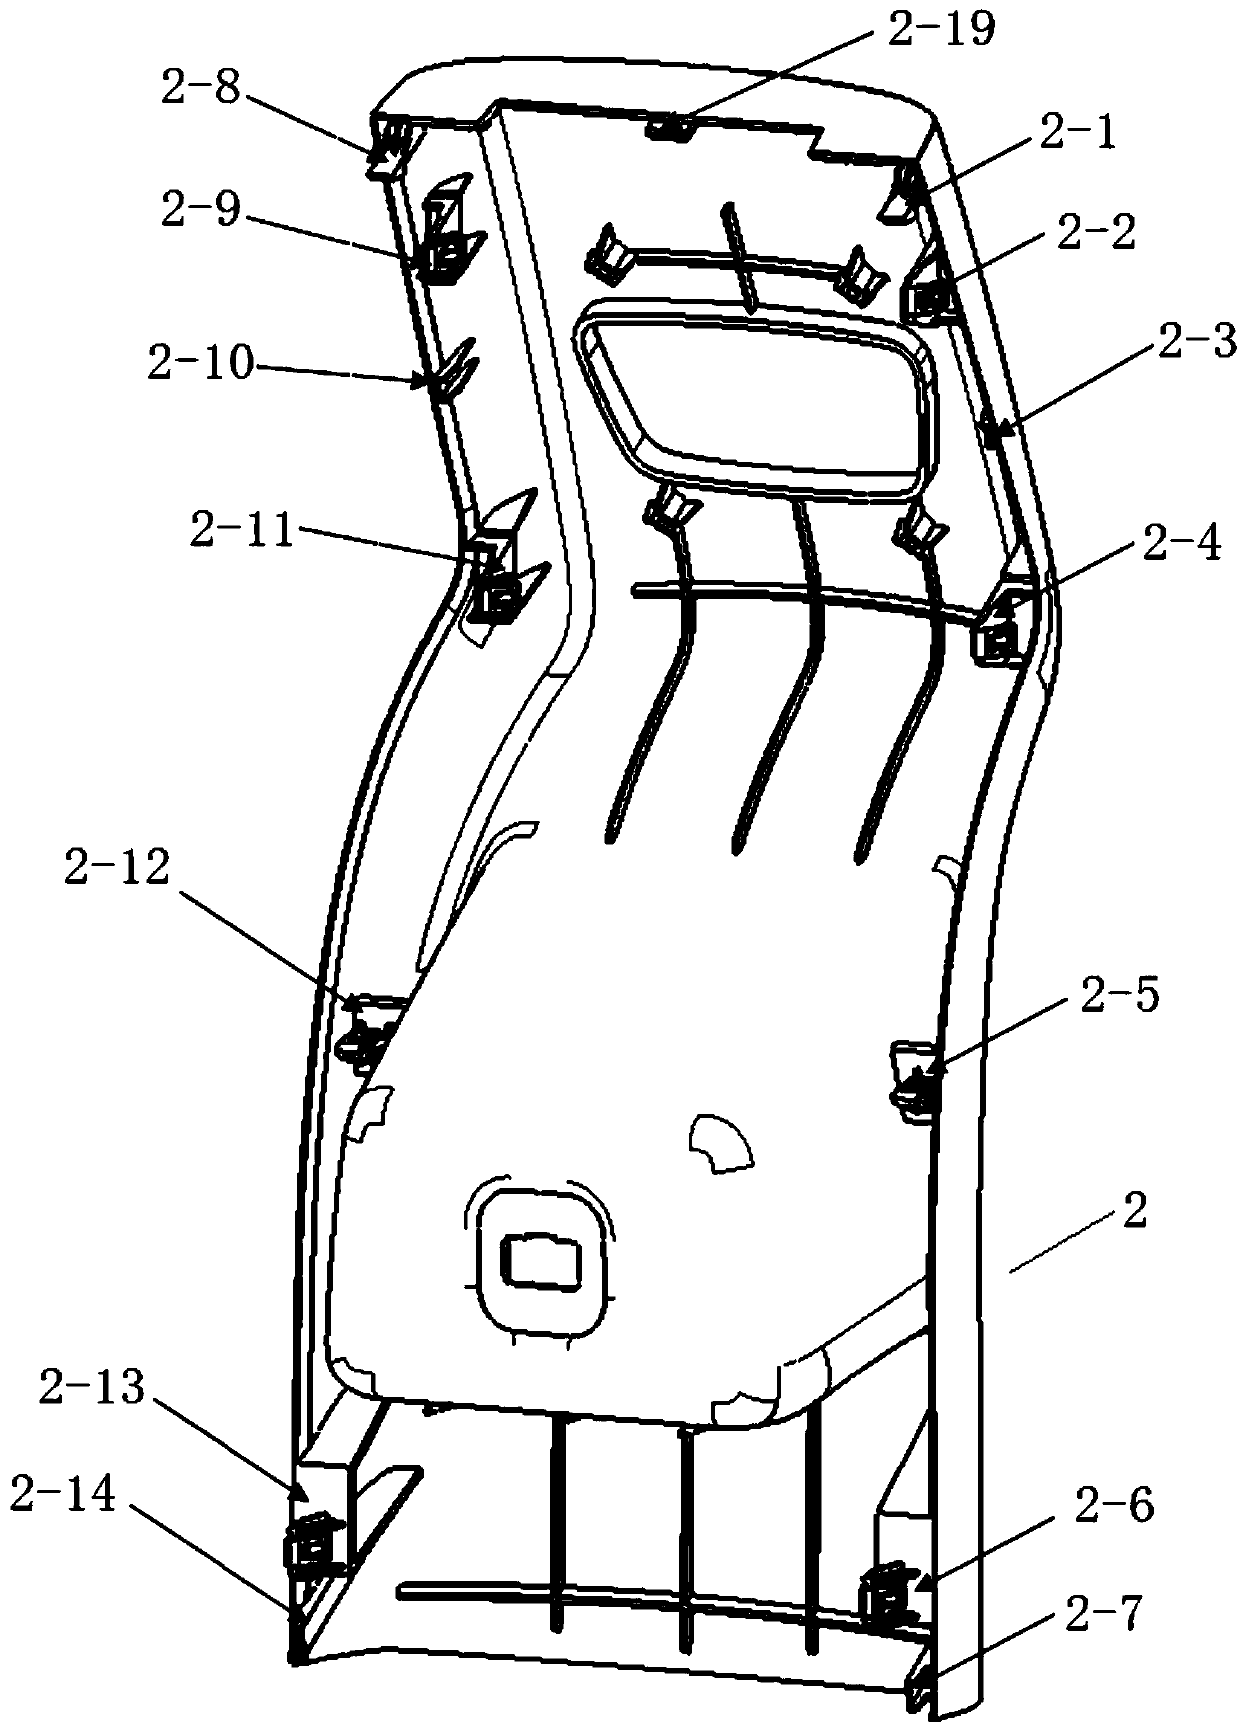 An installation limit structure for an auxiliary instrument panel body and a rear end cover